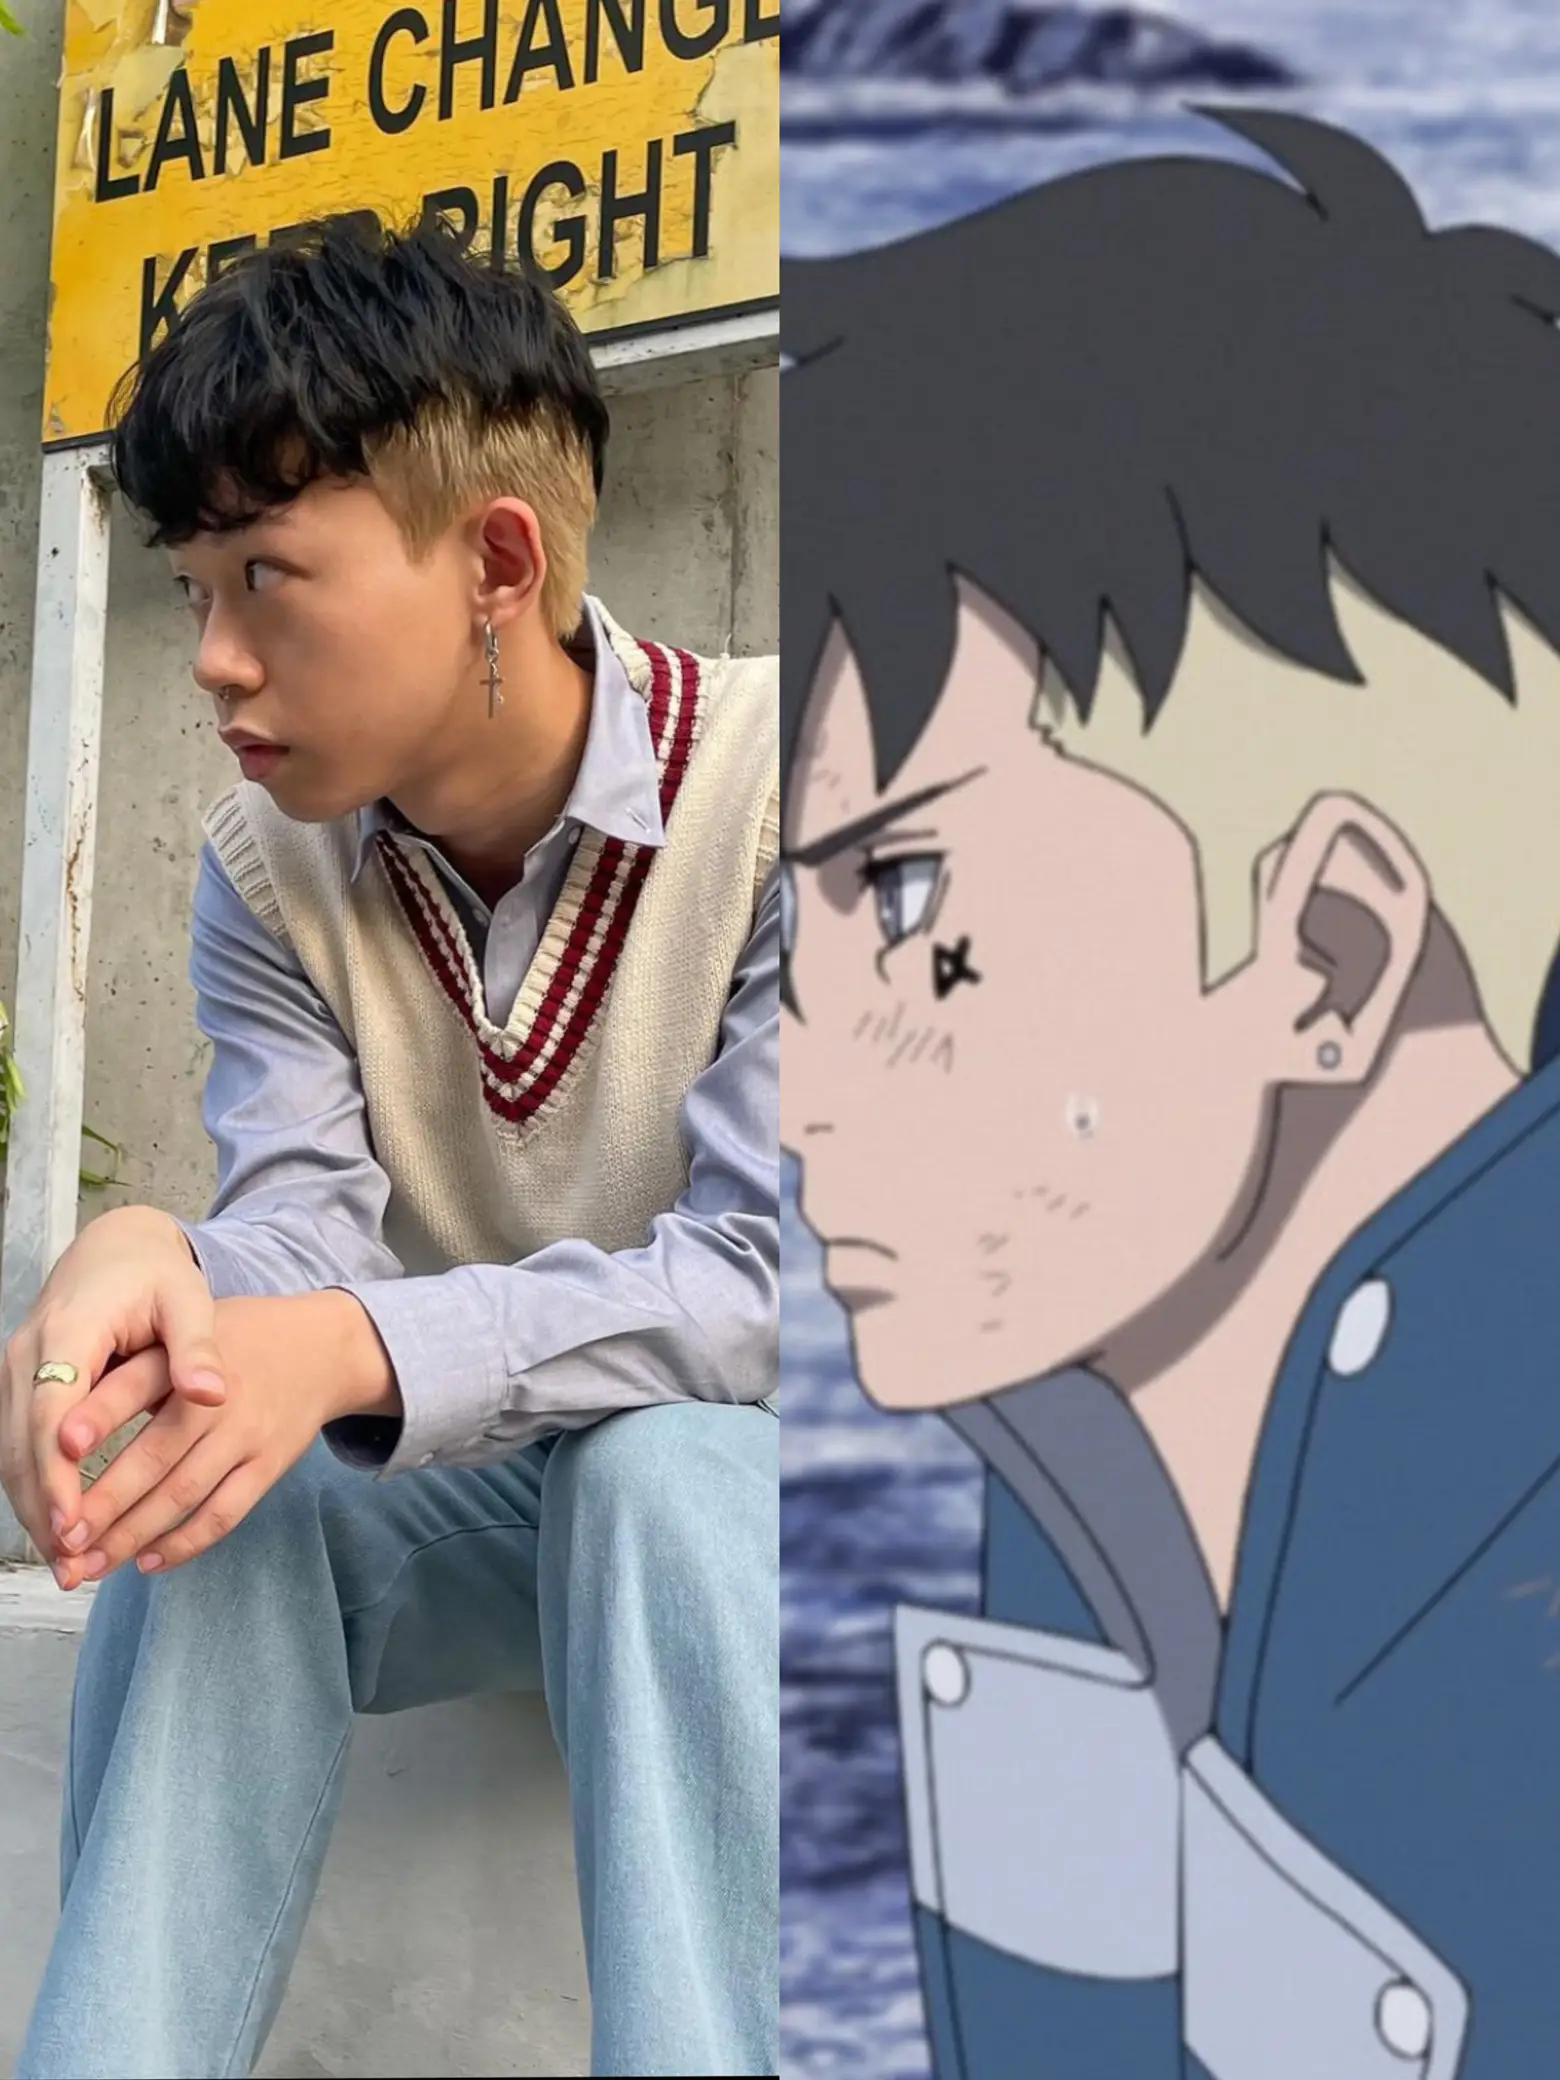 anime haircuts in real life  Anime hairstyles in real life, Anime haircut,  Anime boy hair